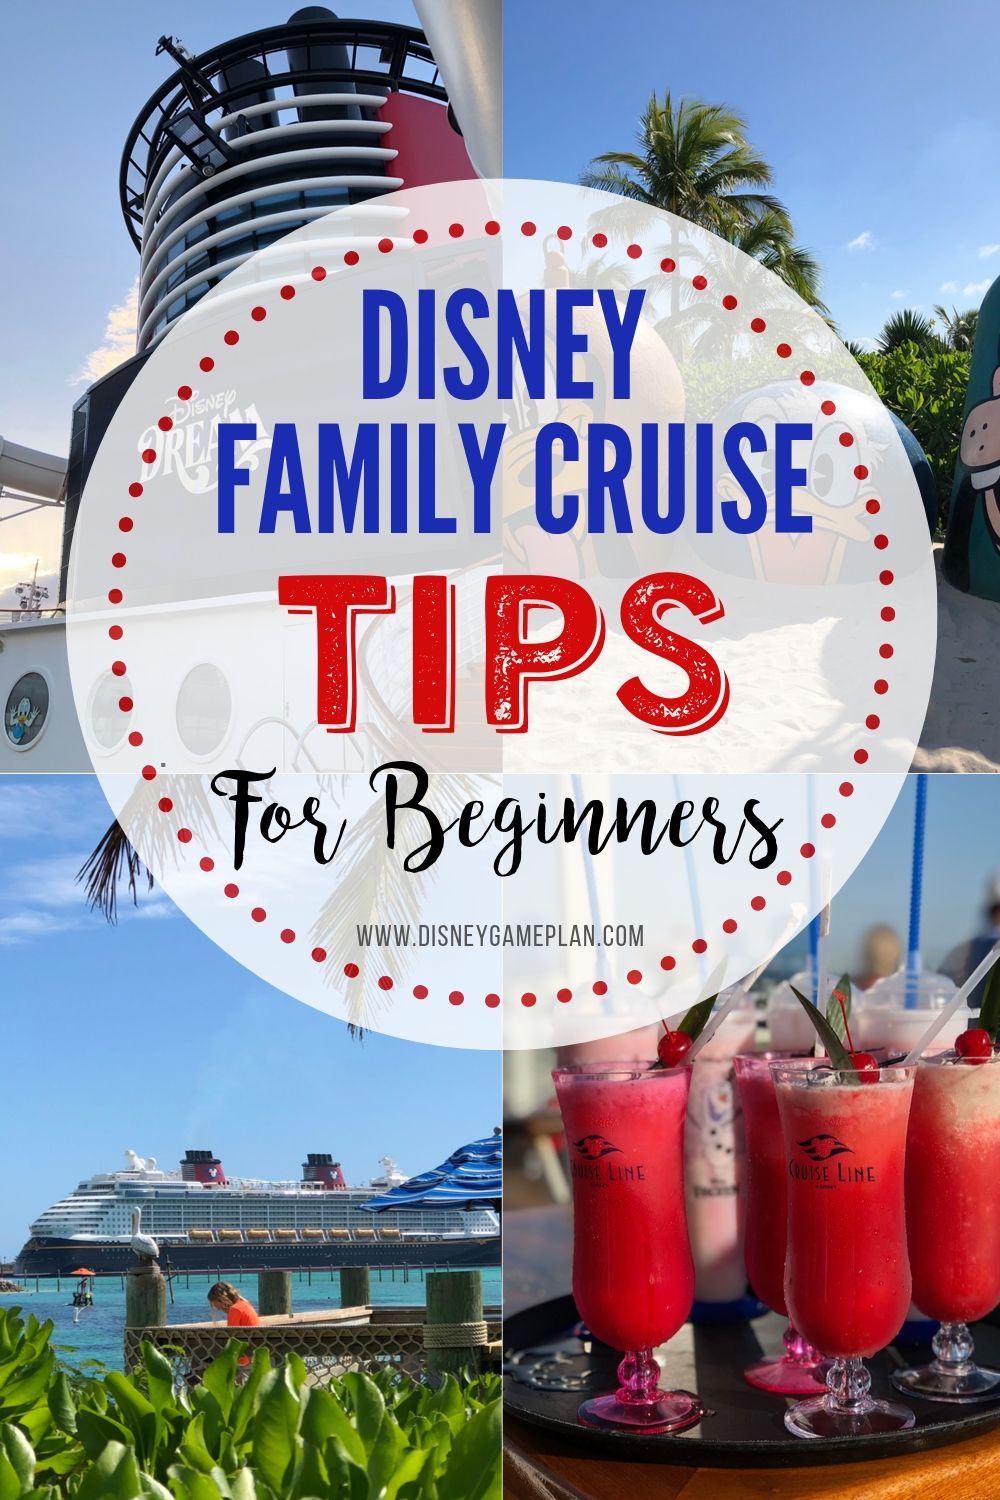 If you have not been on a family Disney cruise before, it's amazing. You really should try it. But first, there are some things you should know about planning a Disney Cruise With your family. #disneycruisetips #disneytips